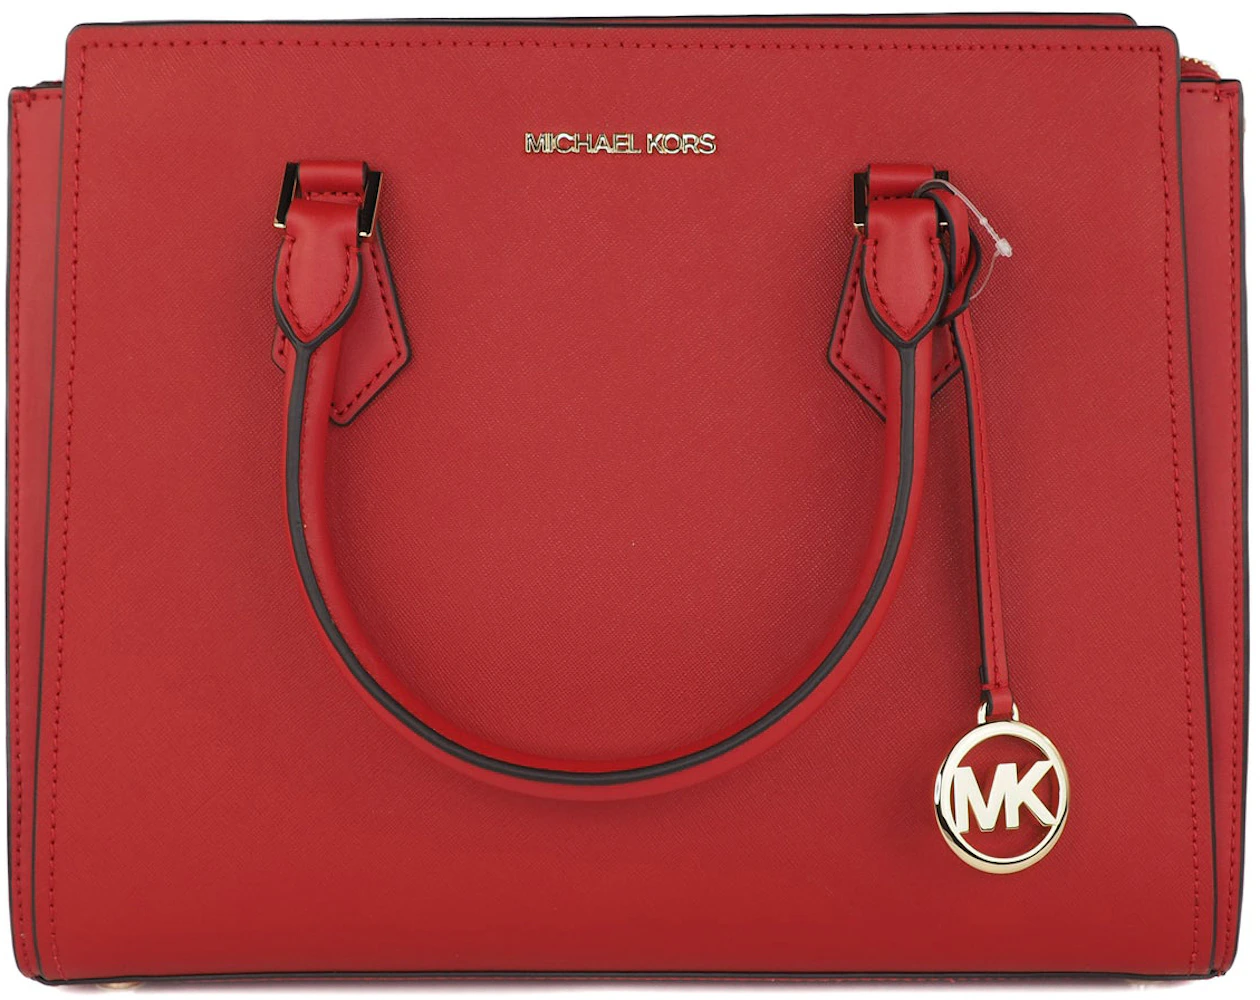 Michael Kors Satchel Bag Large Flame in Saffiano with Gold-tone - US